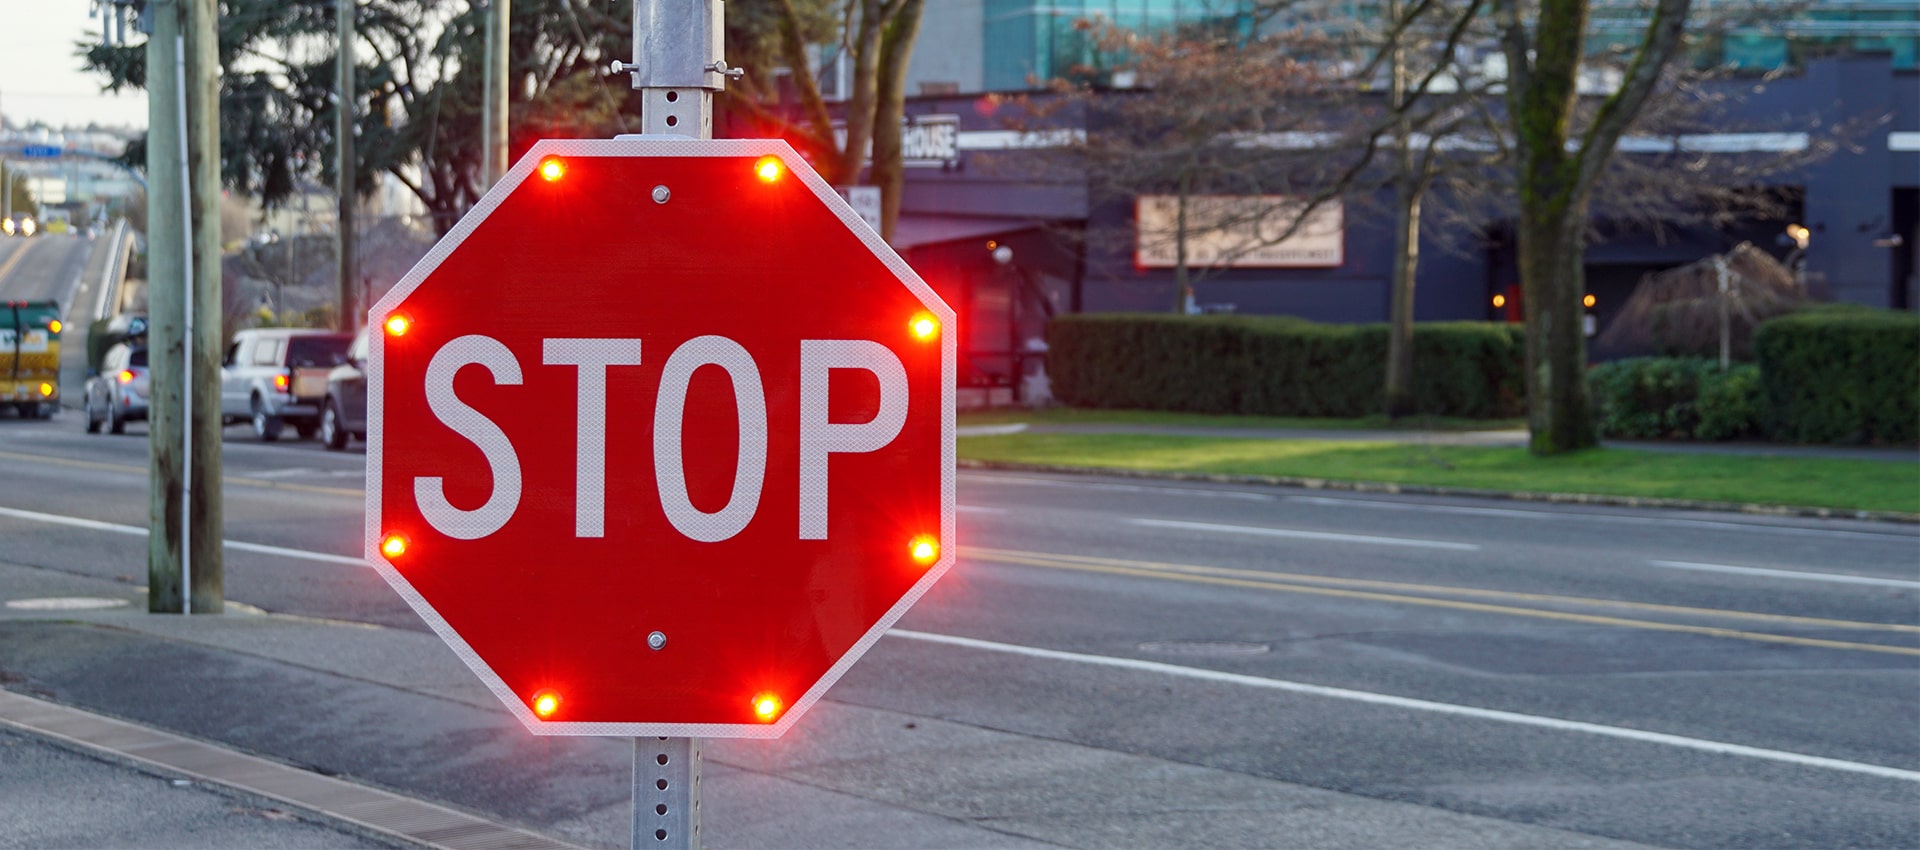 Where and when LED flashing signs work best - Carmanah